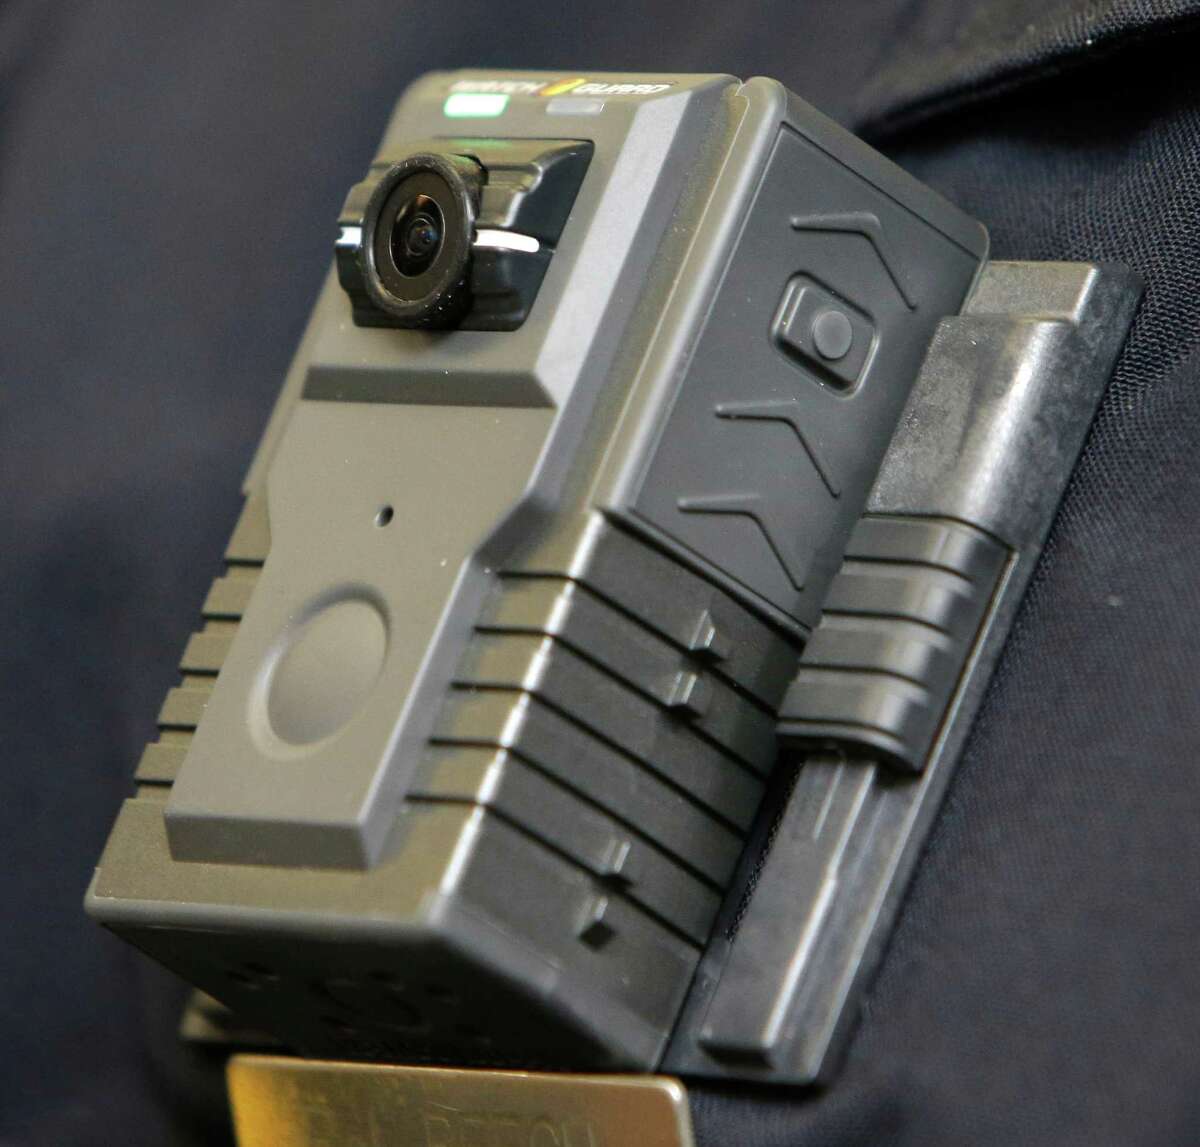 ﻿The cameras must be worn on officers' chests, so citizens interacting with them will know they're being recorded.